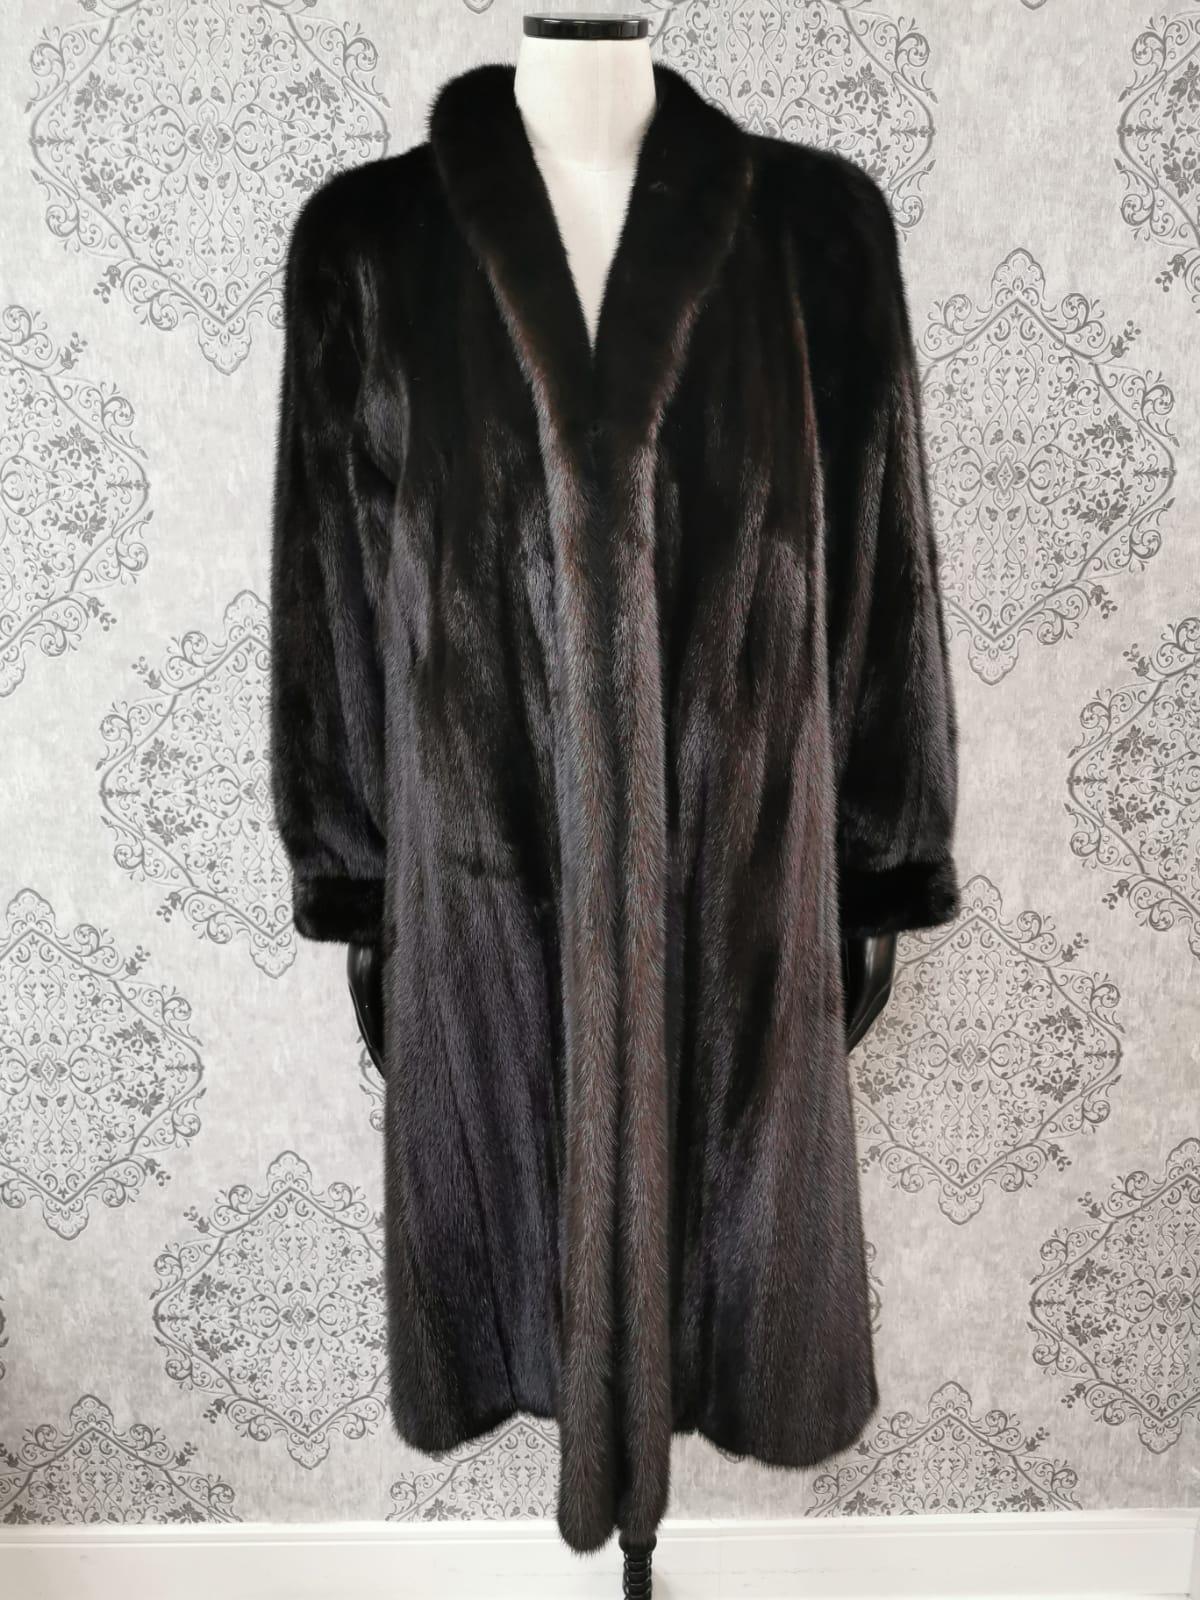 DESCRIPTION : 269 BLACK DIAMOND MINK FUR COAT SIZE 10

Portrait collar, supple skins, beautiful fresh fur, european german clasps for closure, too slit pockets, nice big full pelts skins in excellent condition.

This item is made in Canada with the